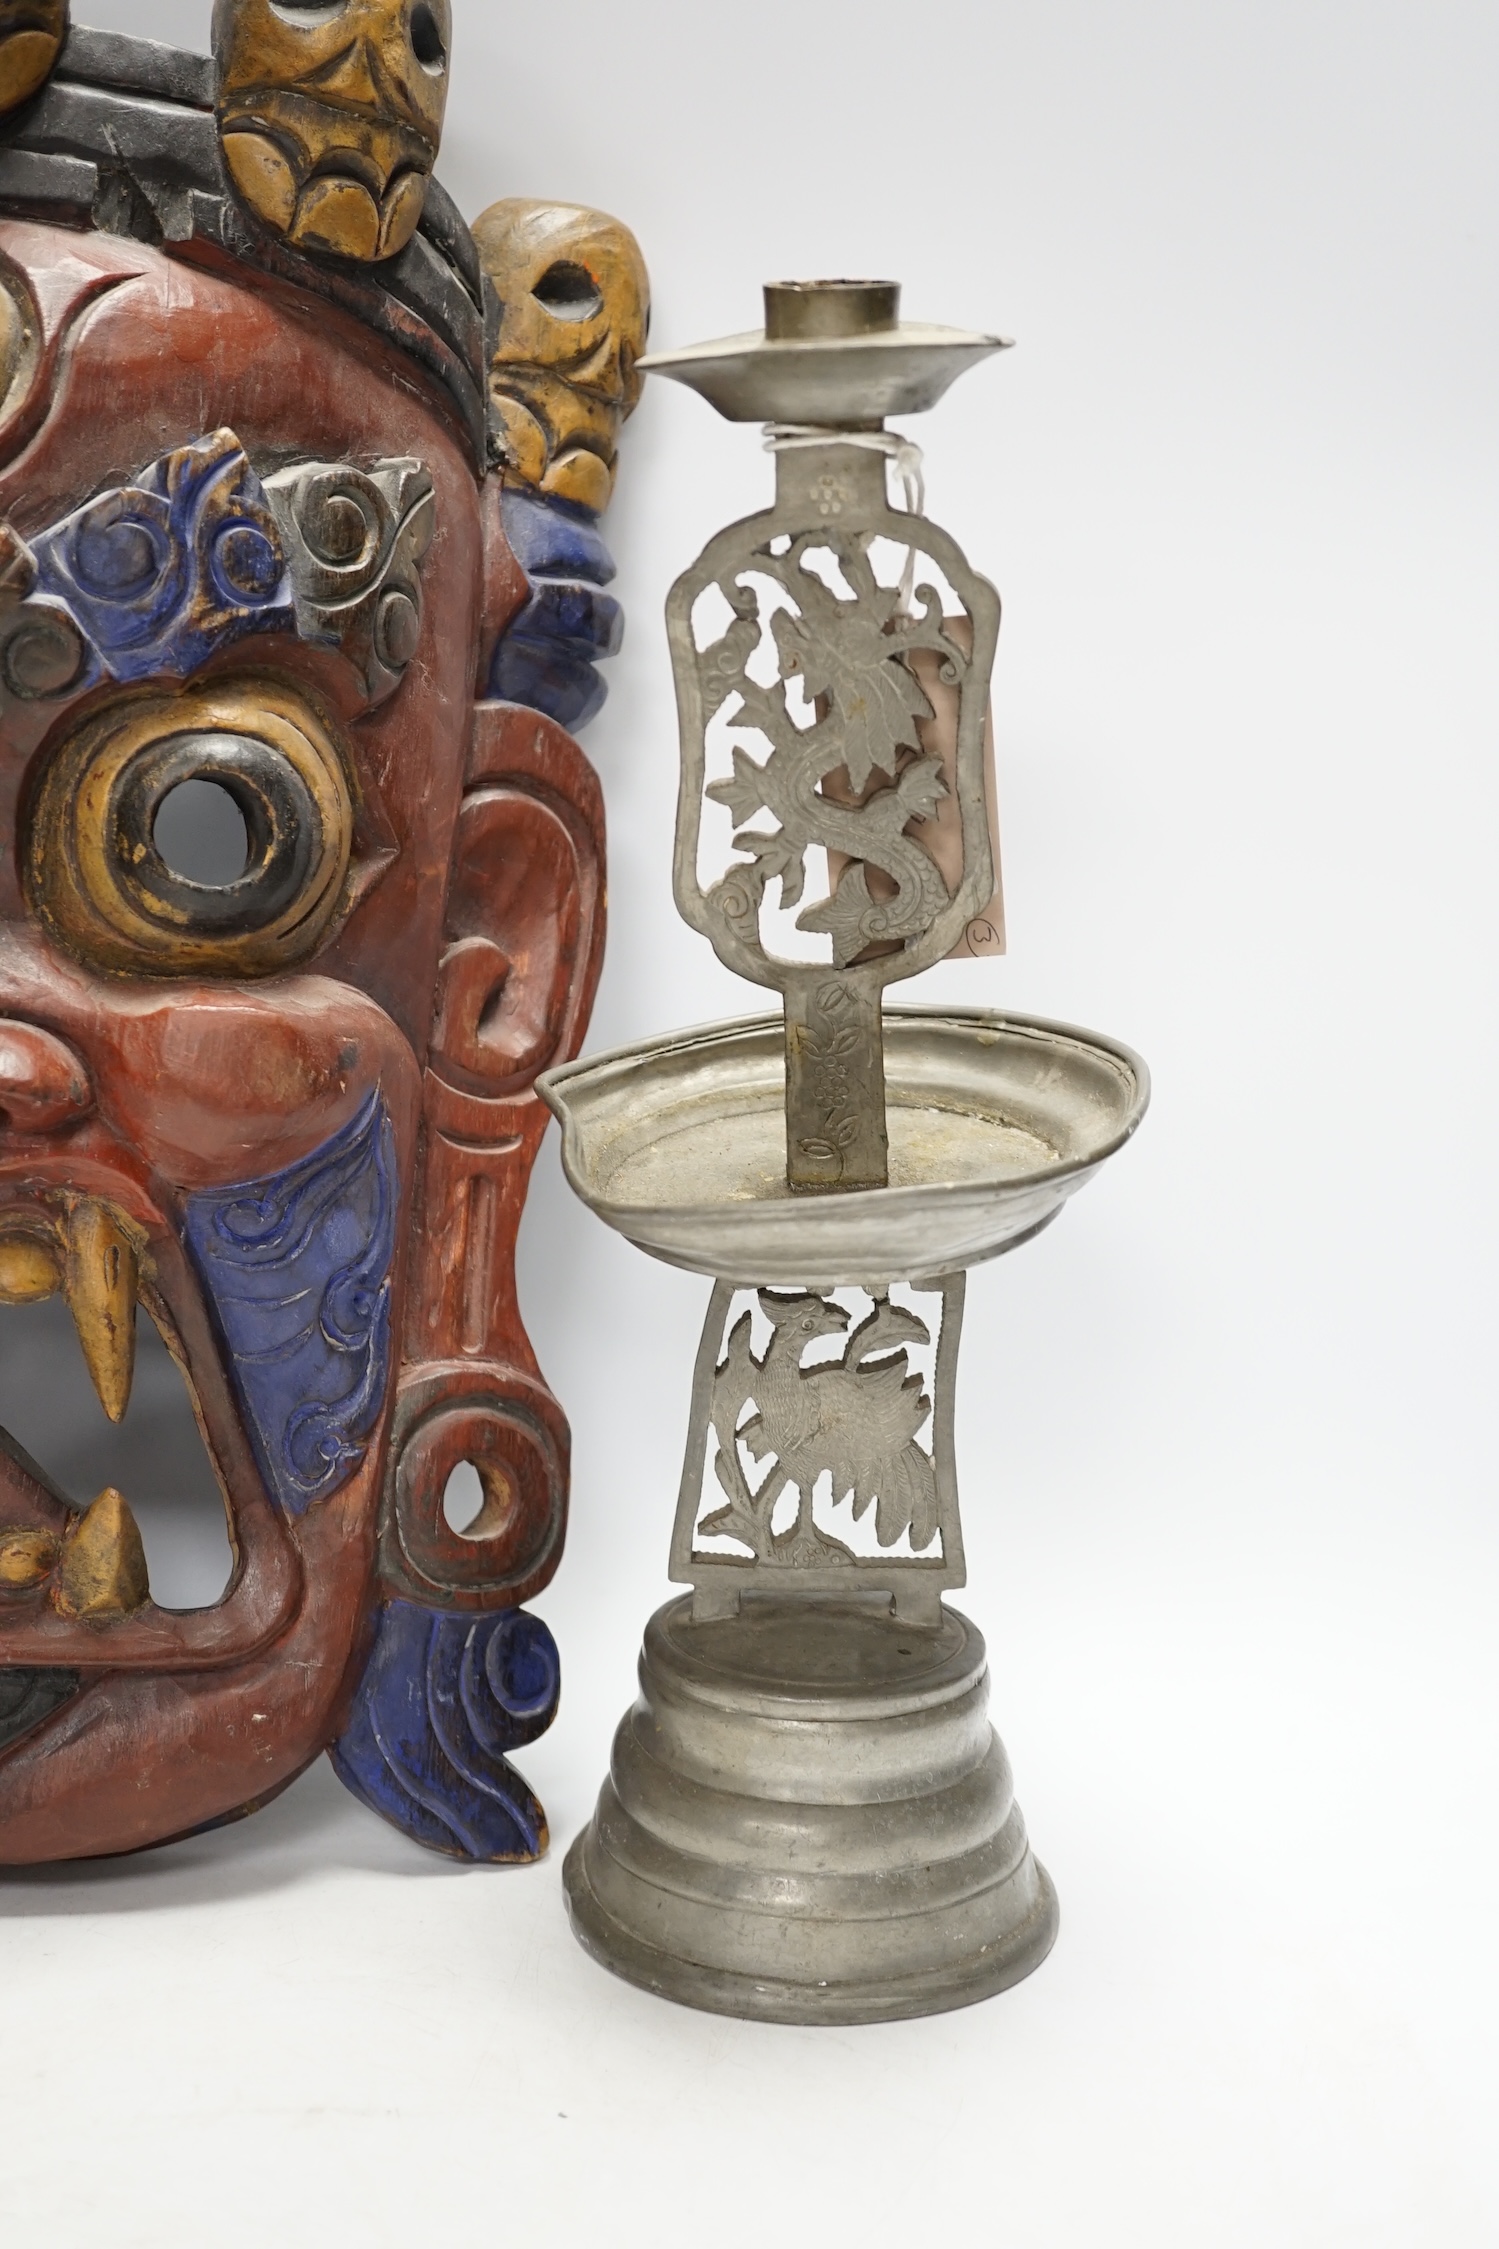 A Tibetan painted wood mask and a cast pewter candlestick, mask 44cm high